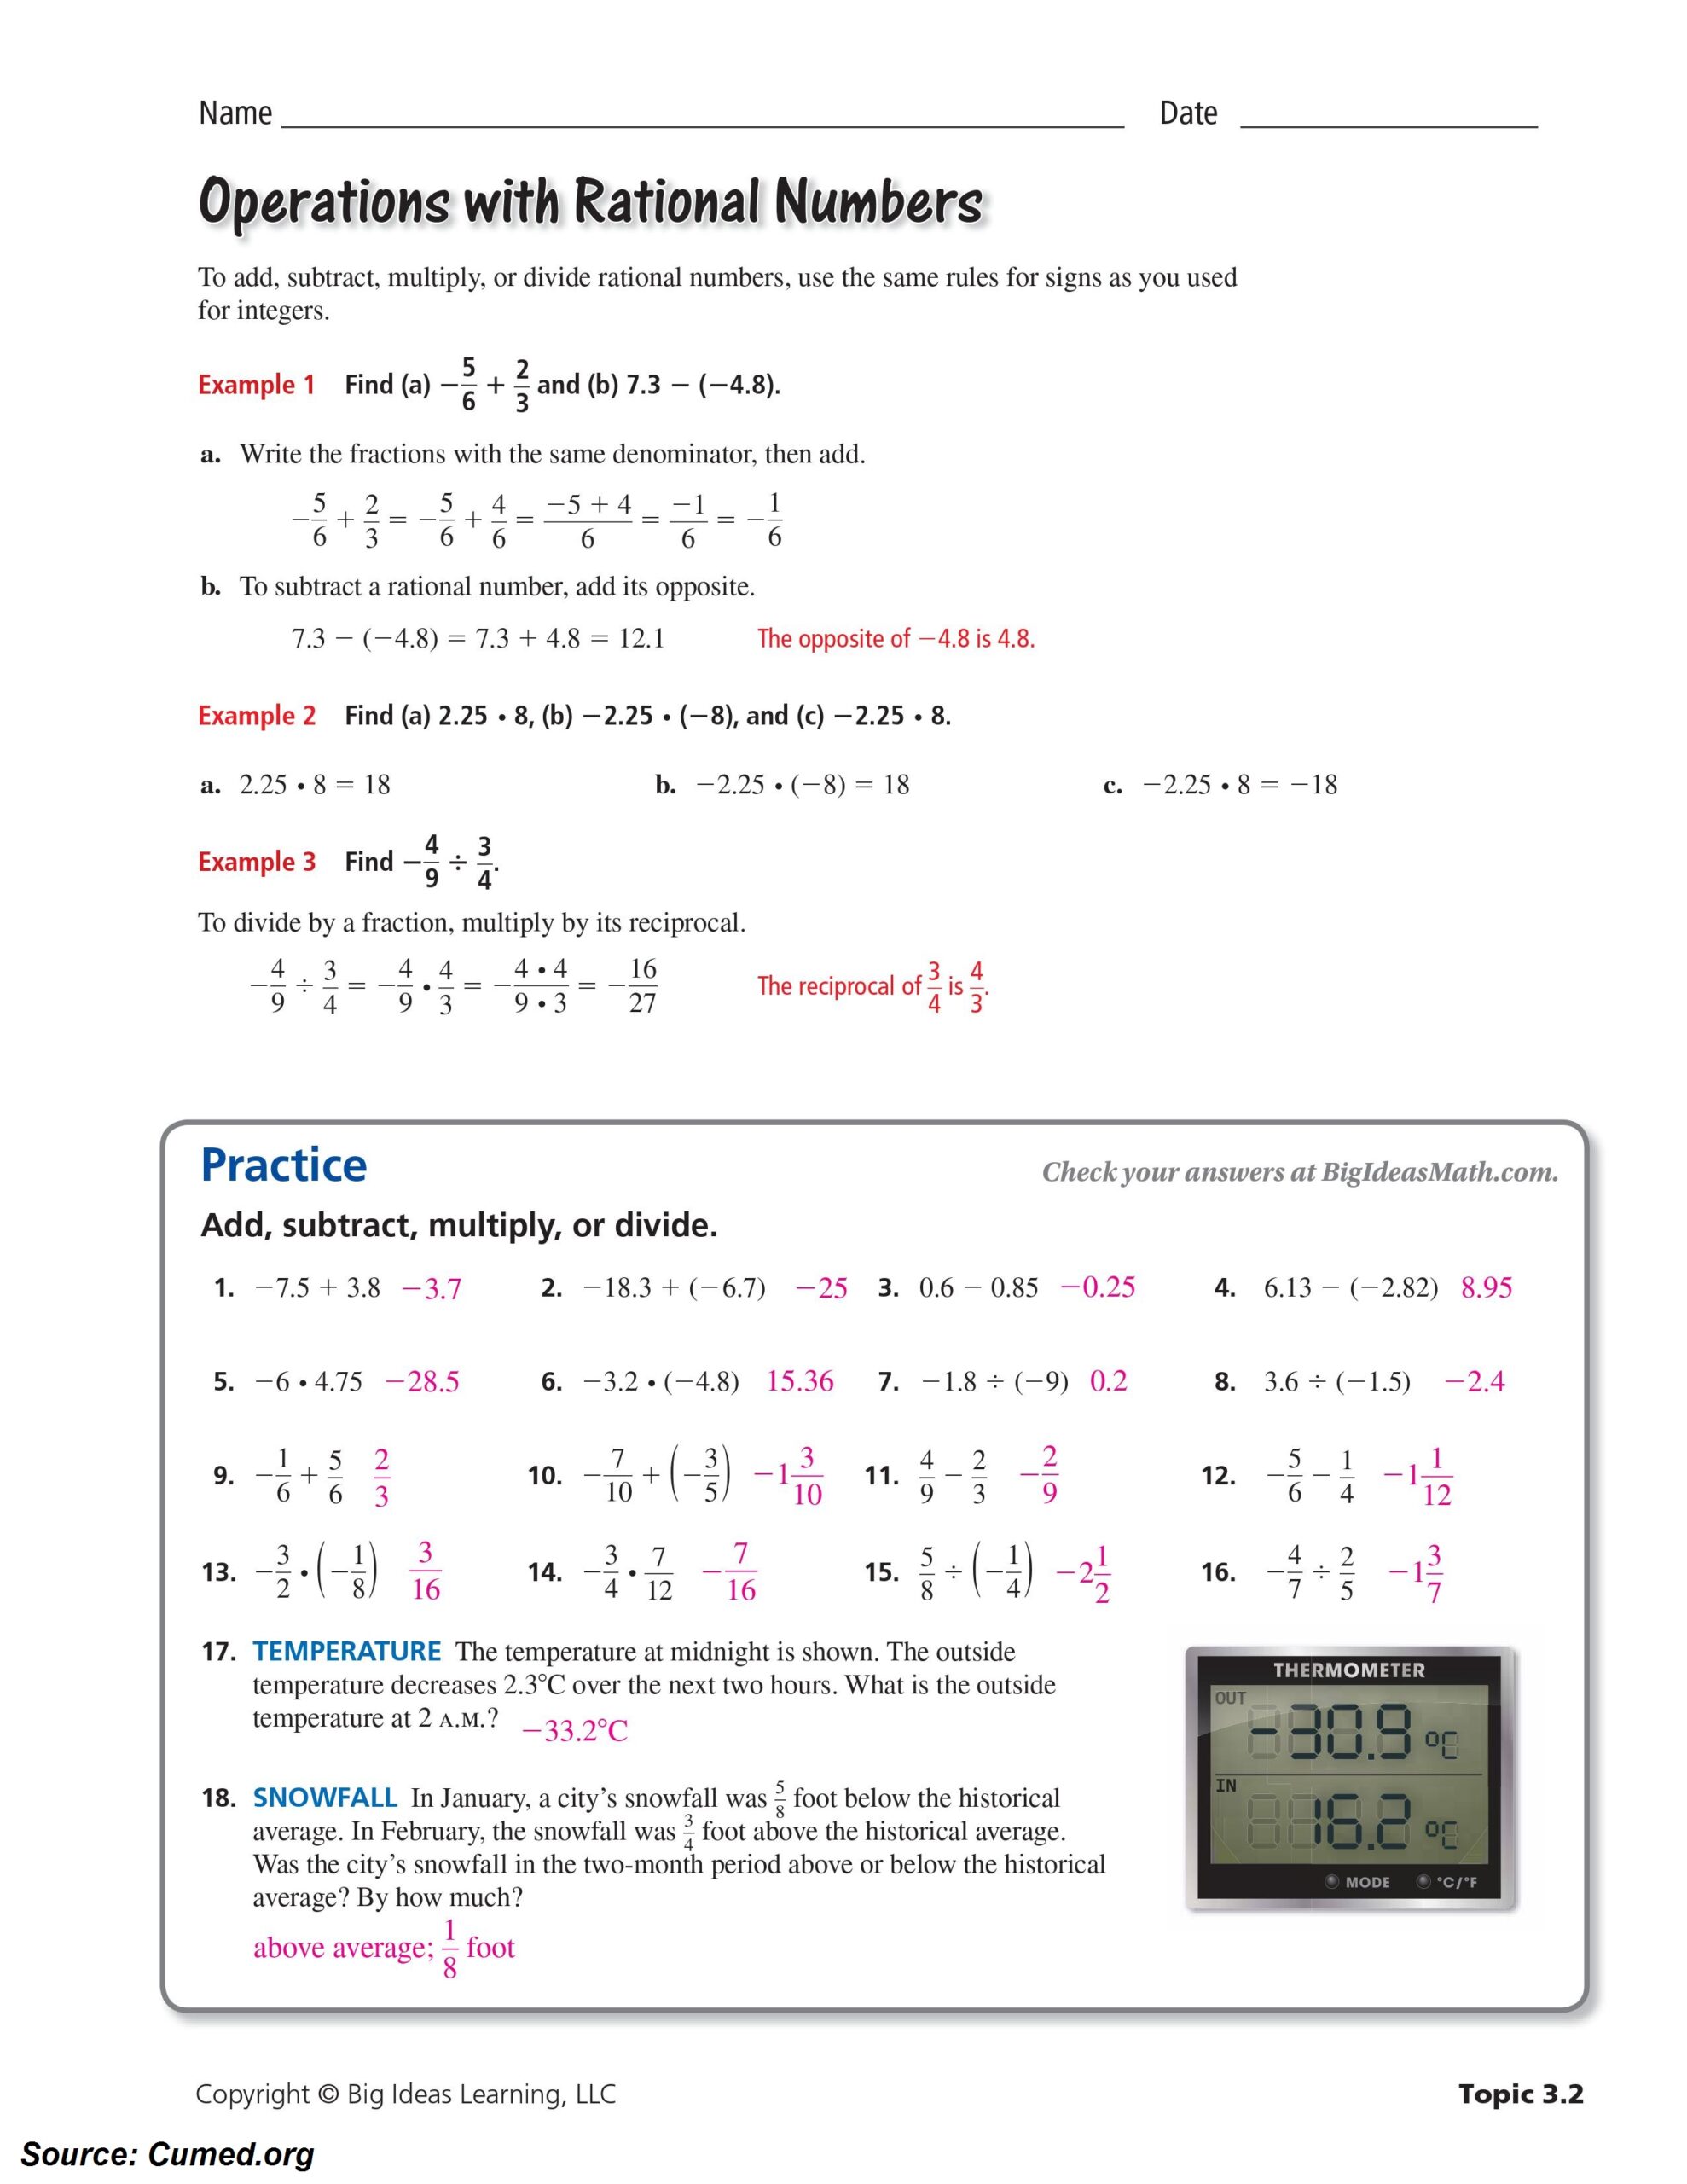 Operations With Rational Numbers Worksheet Answer Key